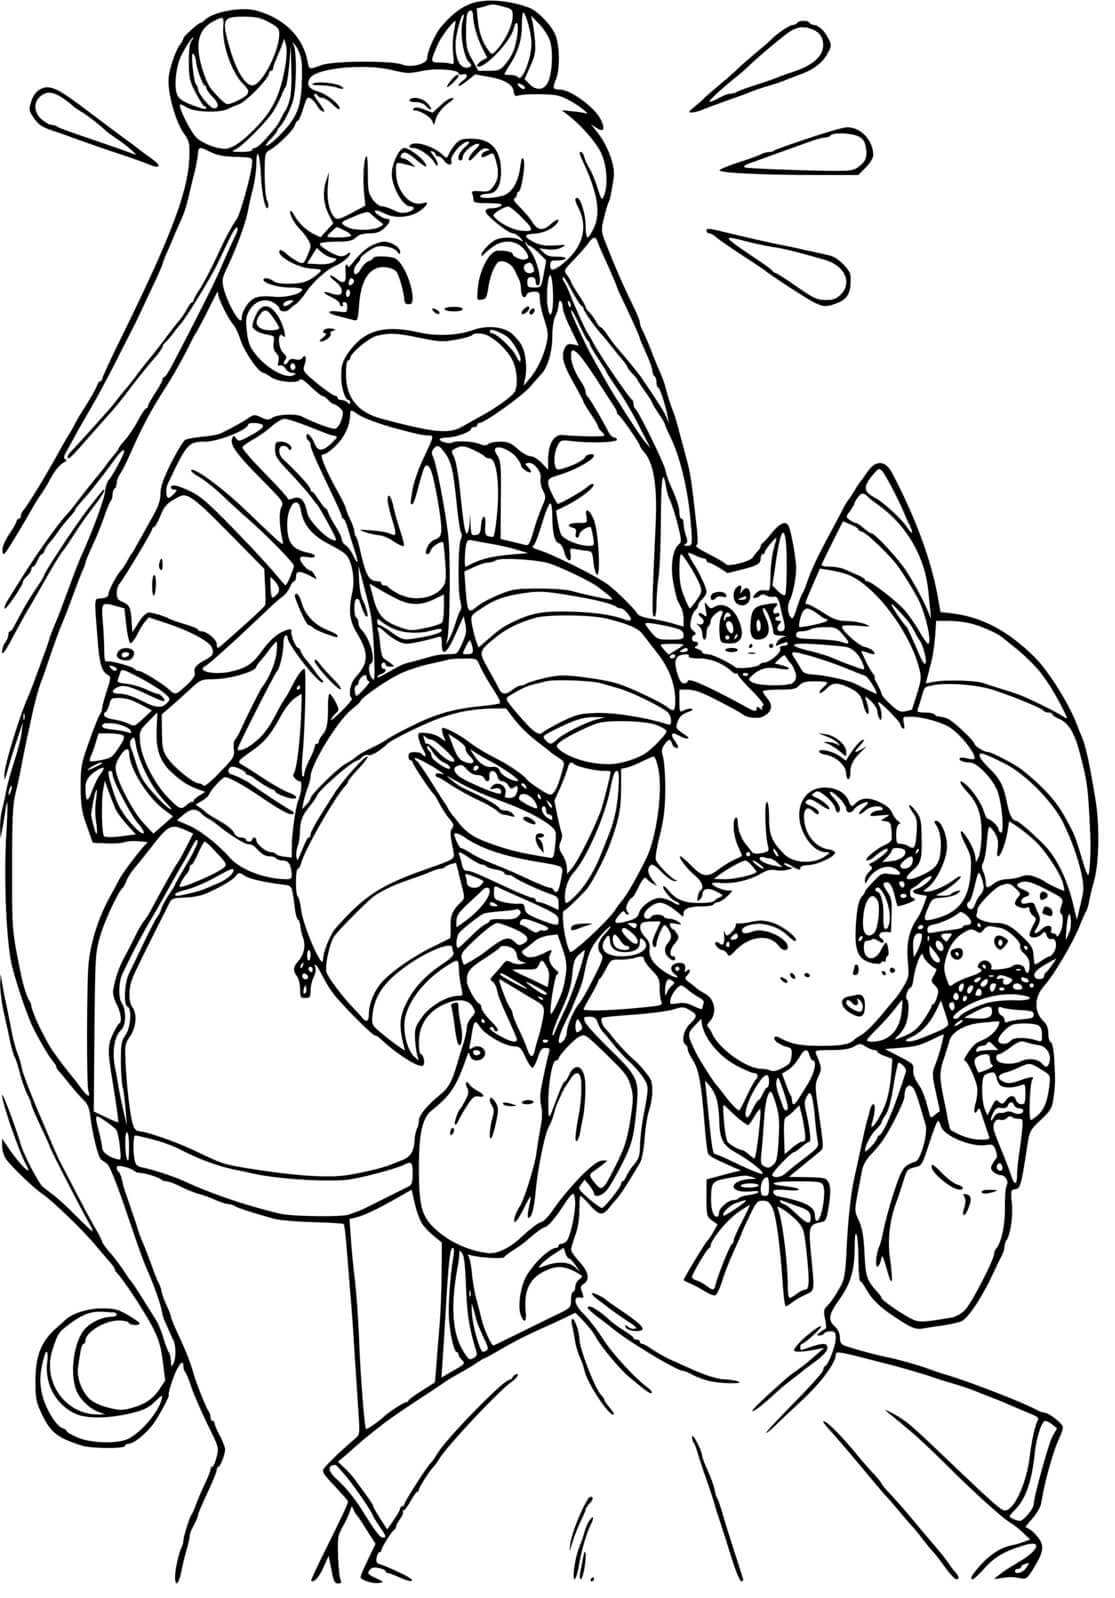 Sailor Moon Characters Coloring Pages - Coloring Cool